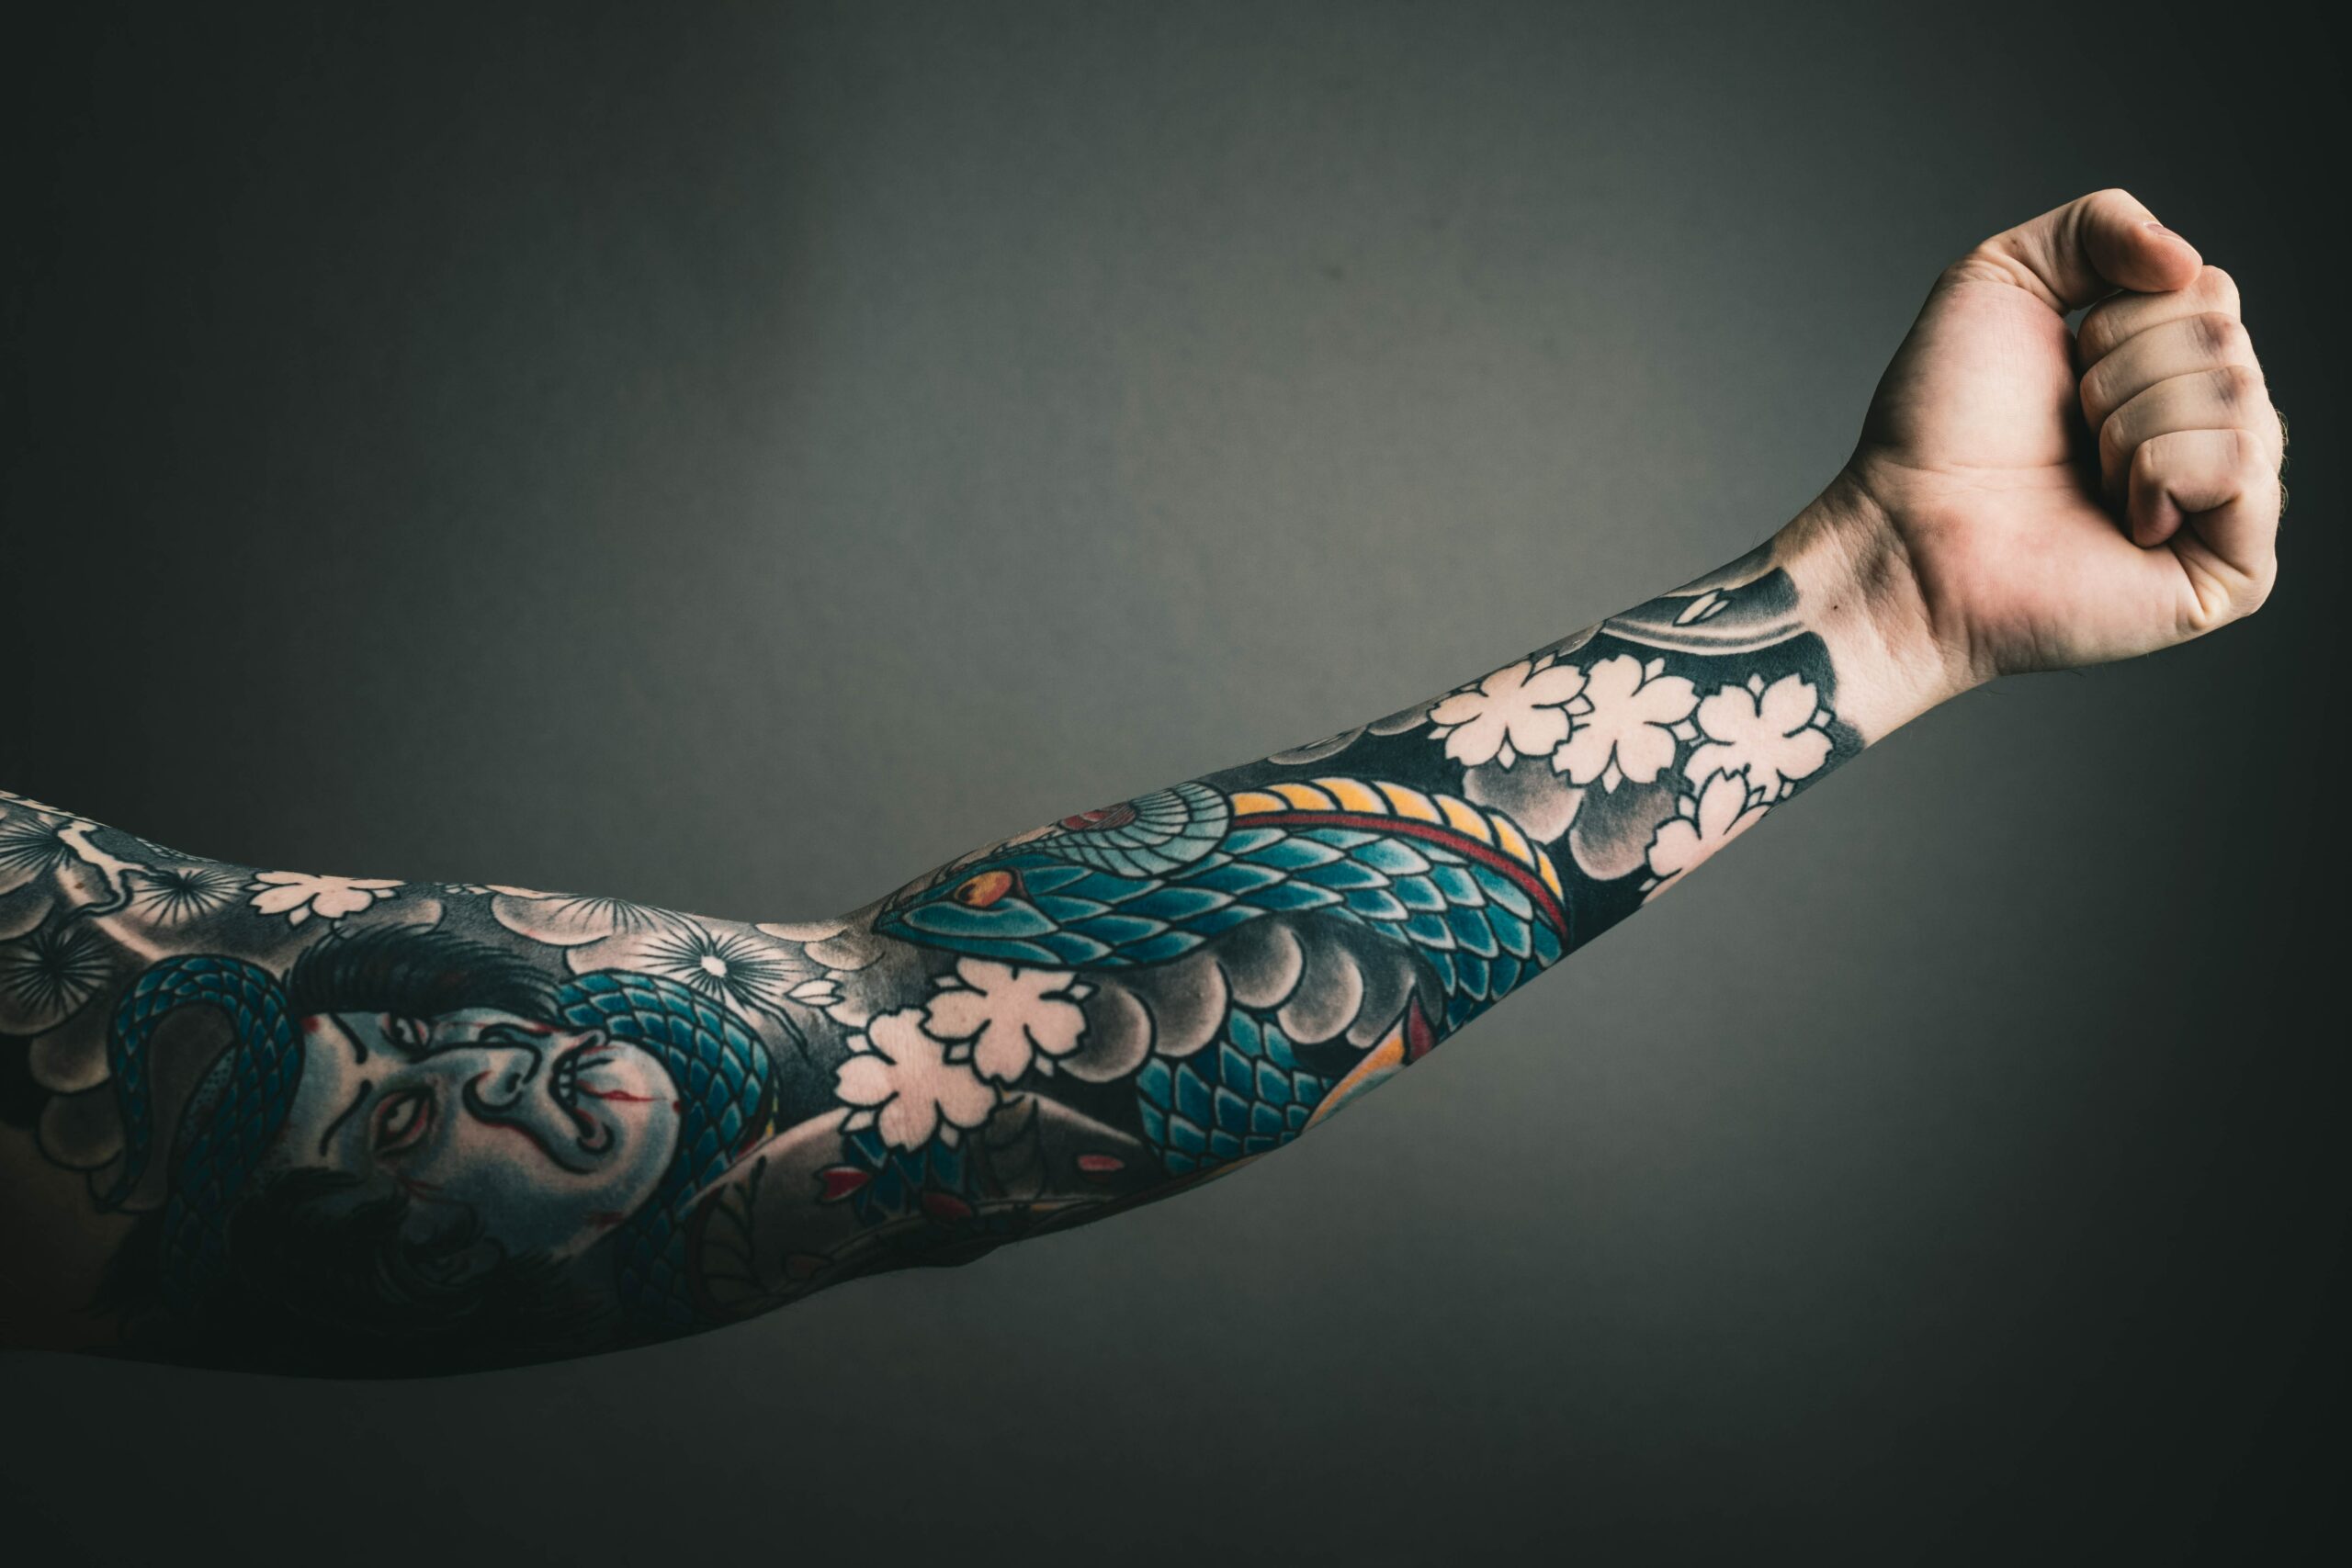 Definitive History of Tattoos - The Ancient Art of Tattooing